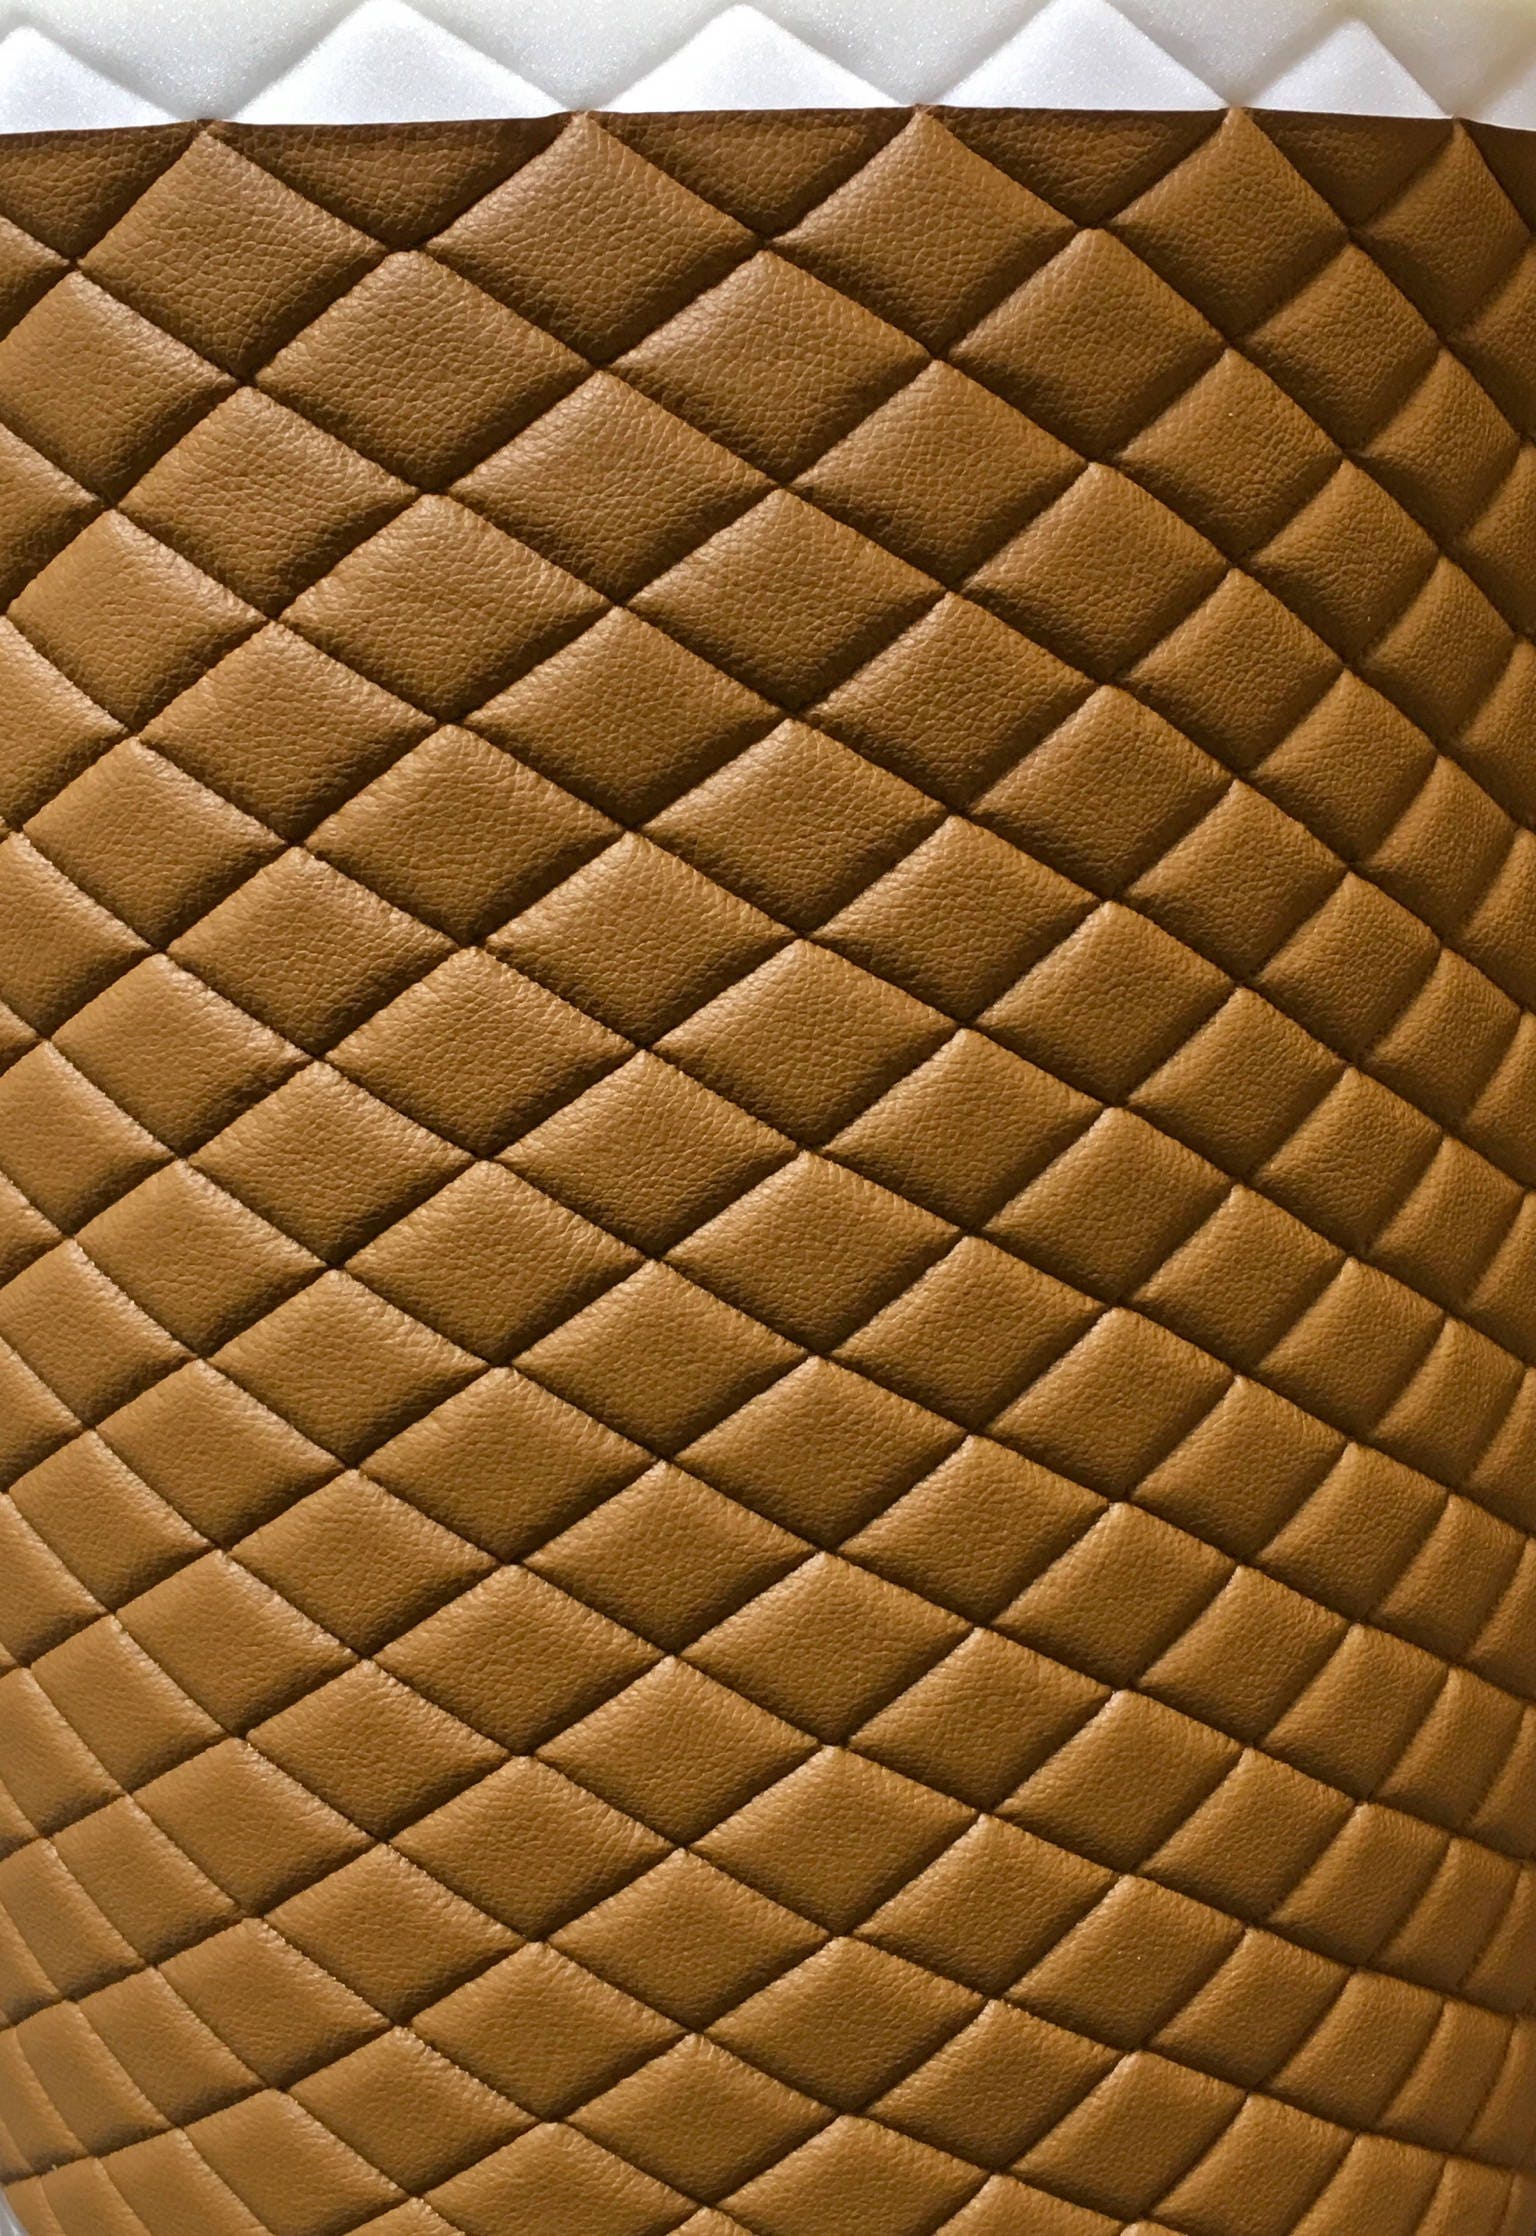 Brown Diamond Quilted Faux Leather Vinyl 3/8 Foam Backing 54